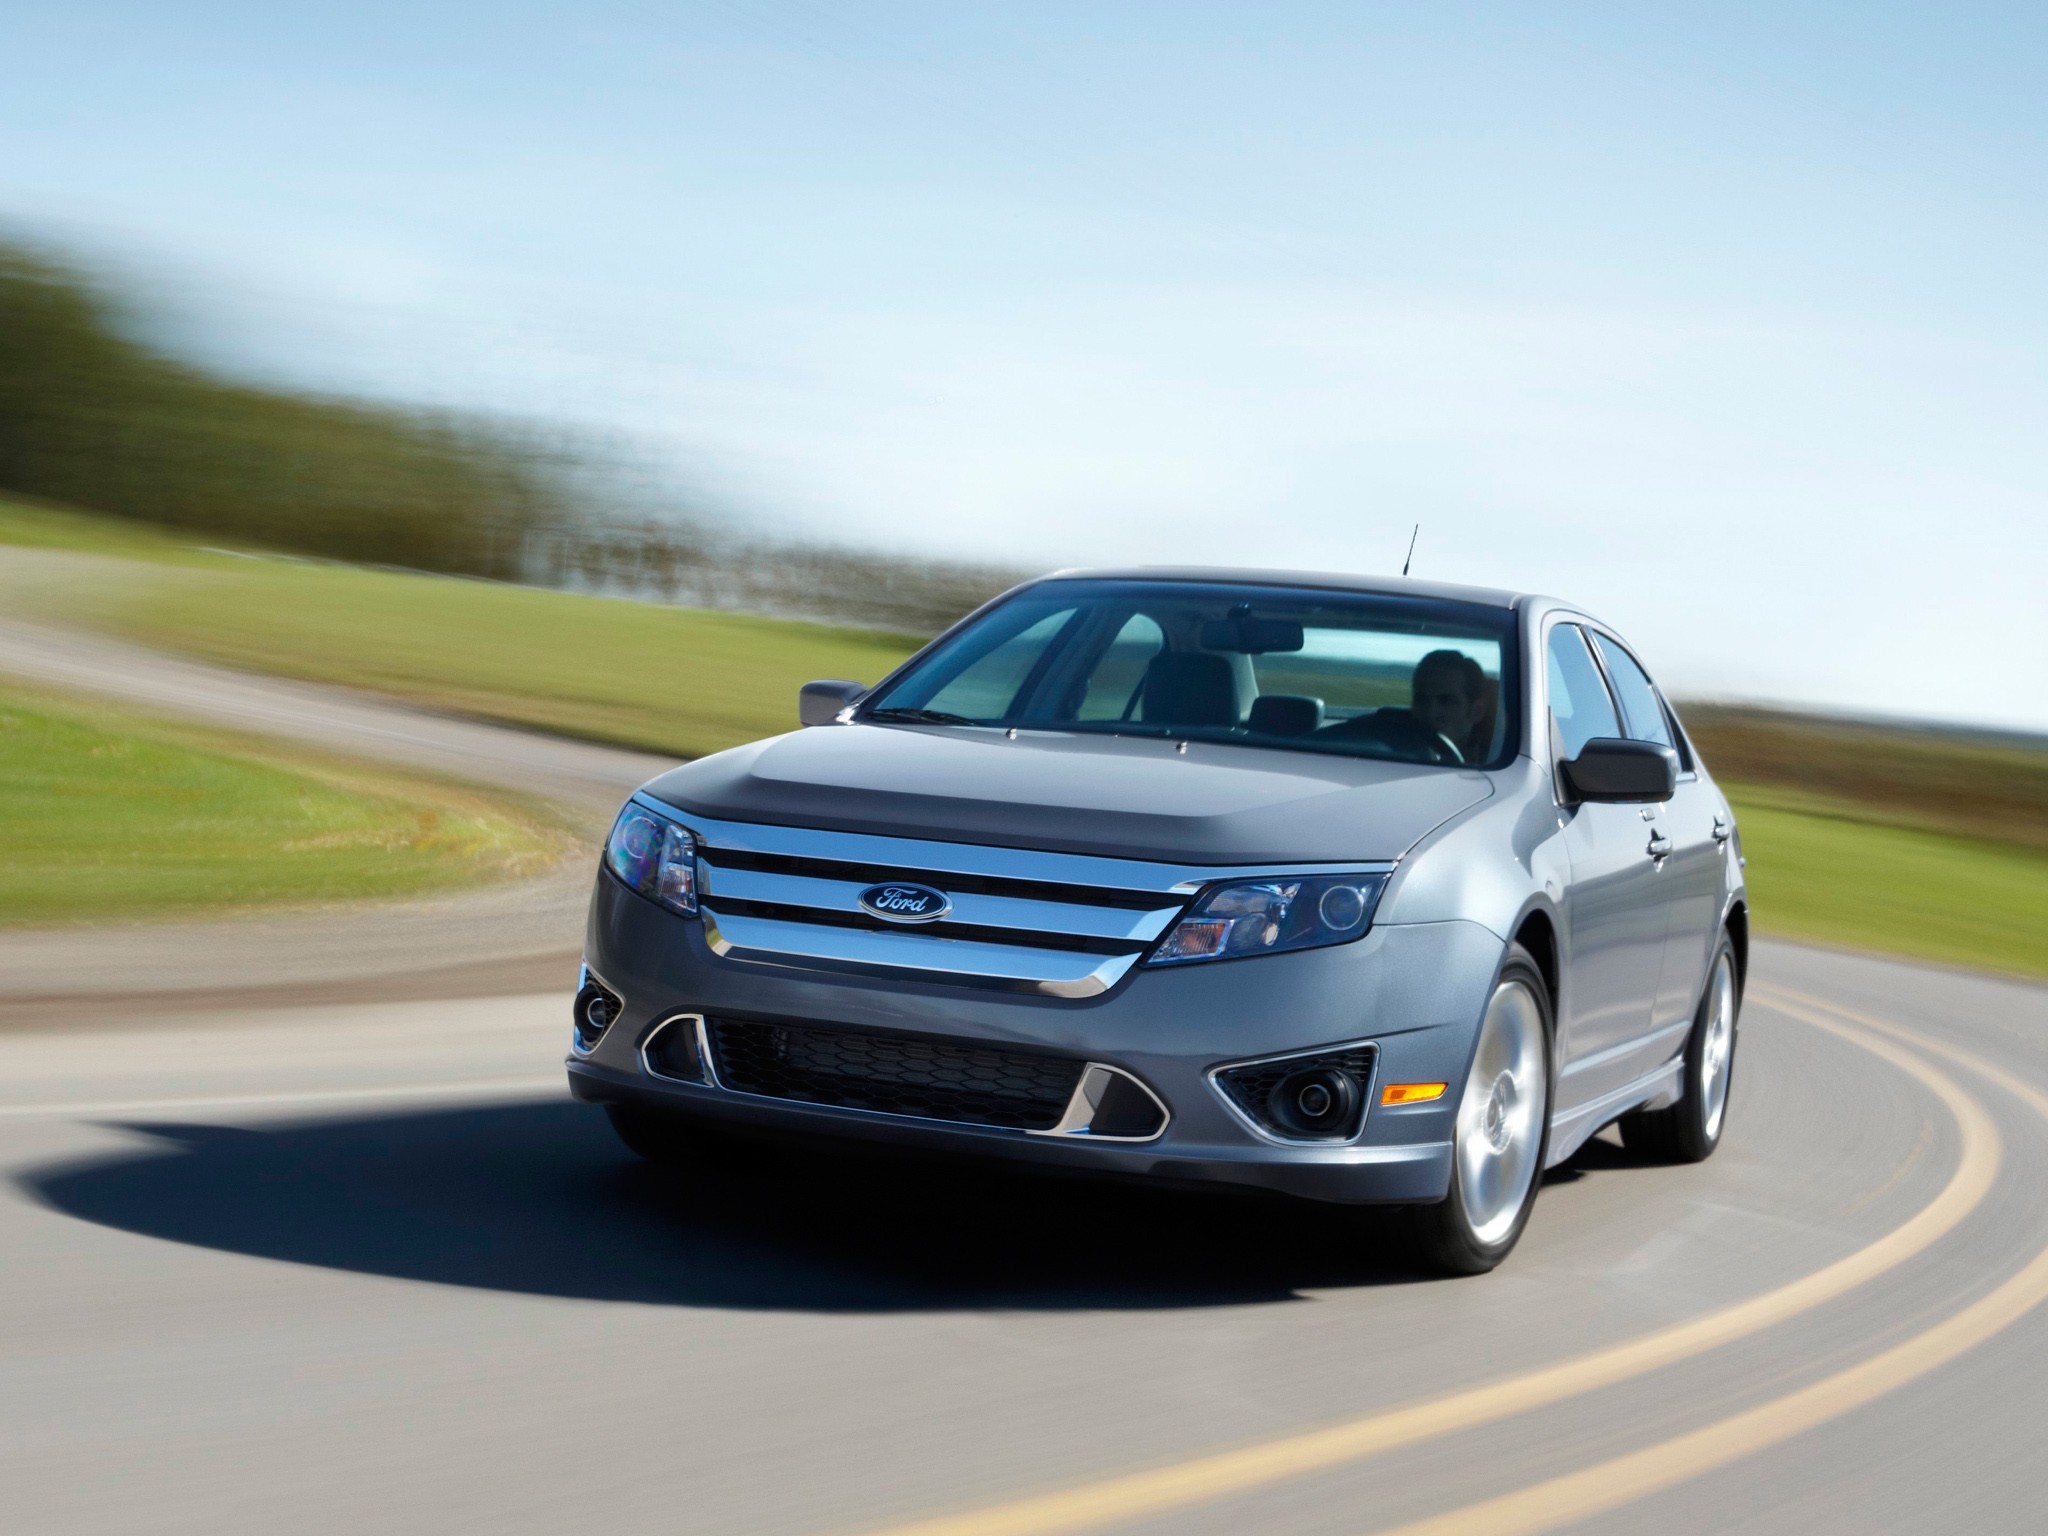 2010 Ford fusion ground clearance #4